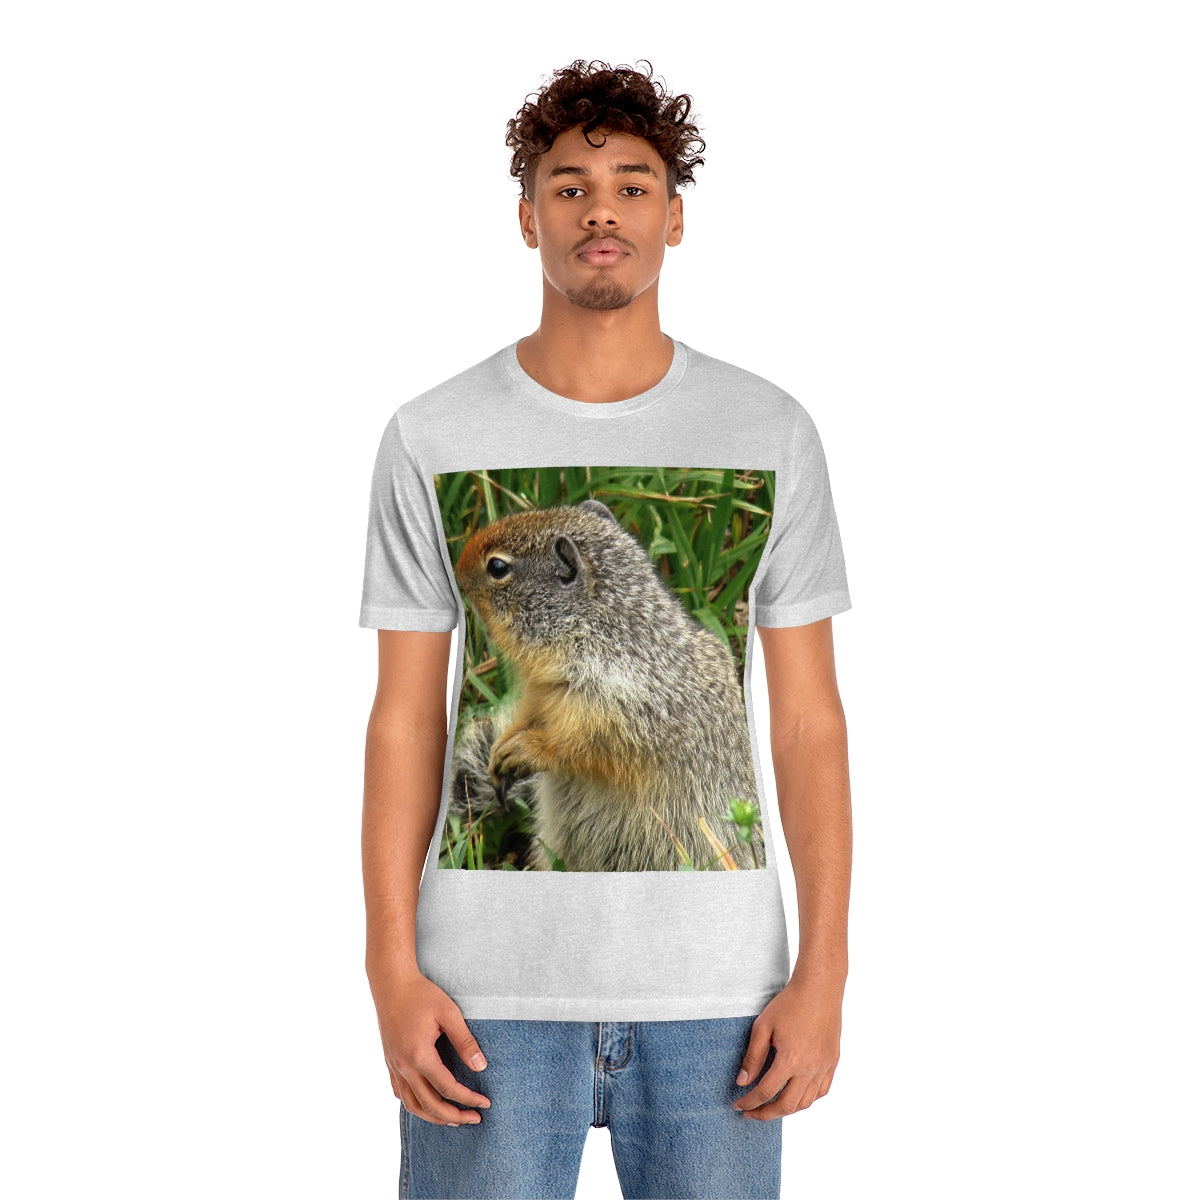 Inquisitive Stare - Unisex Jersey Short Sleeve T-Shirt - Fry1Productions